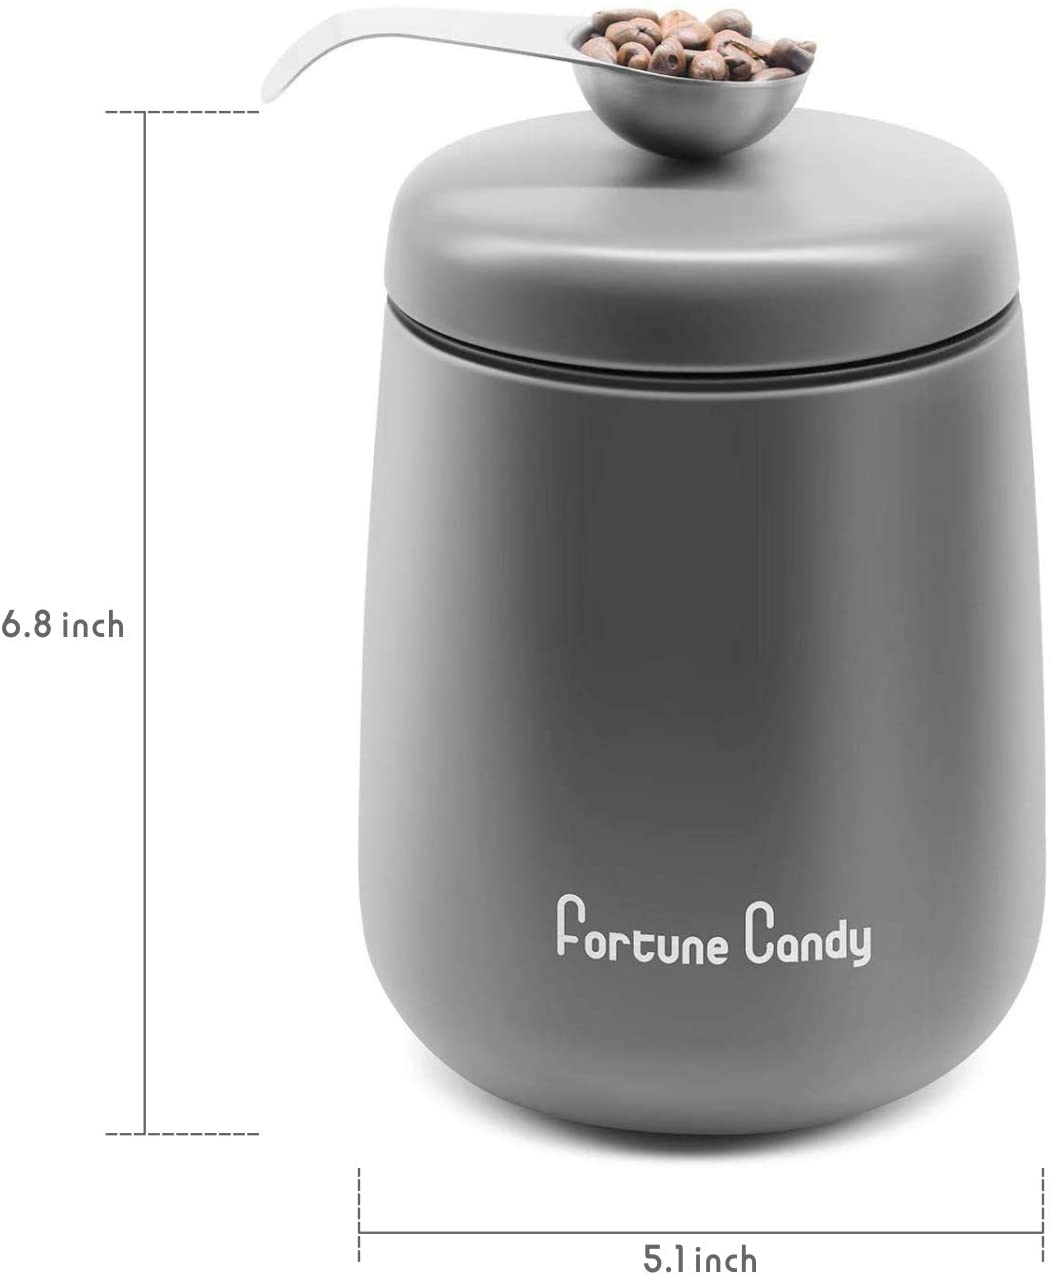 Fortune Candy Airtight Container - Stainless Steel, Magnetic Lid & Scoop - 18 oz (Matte Grey)